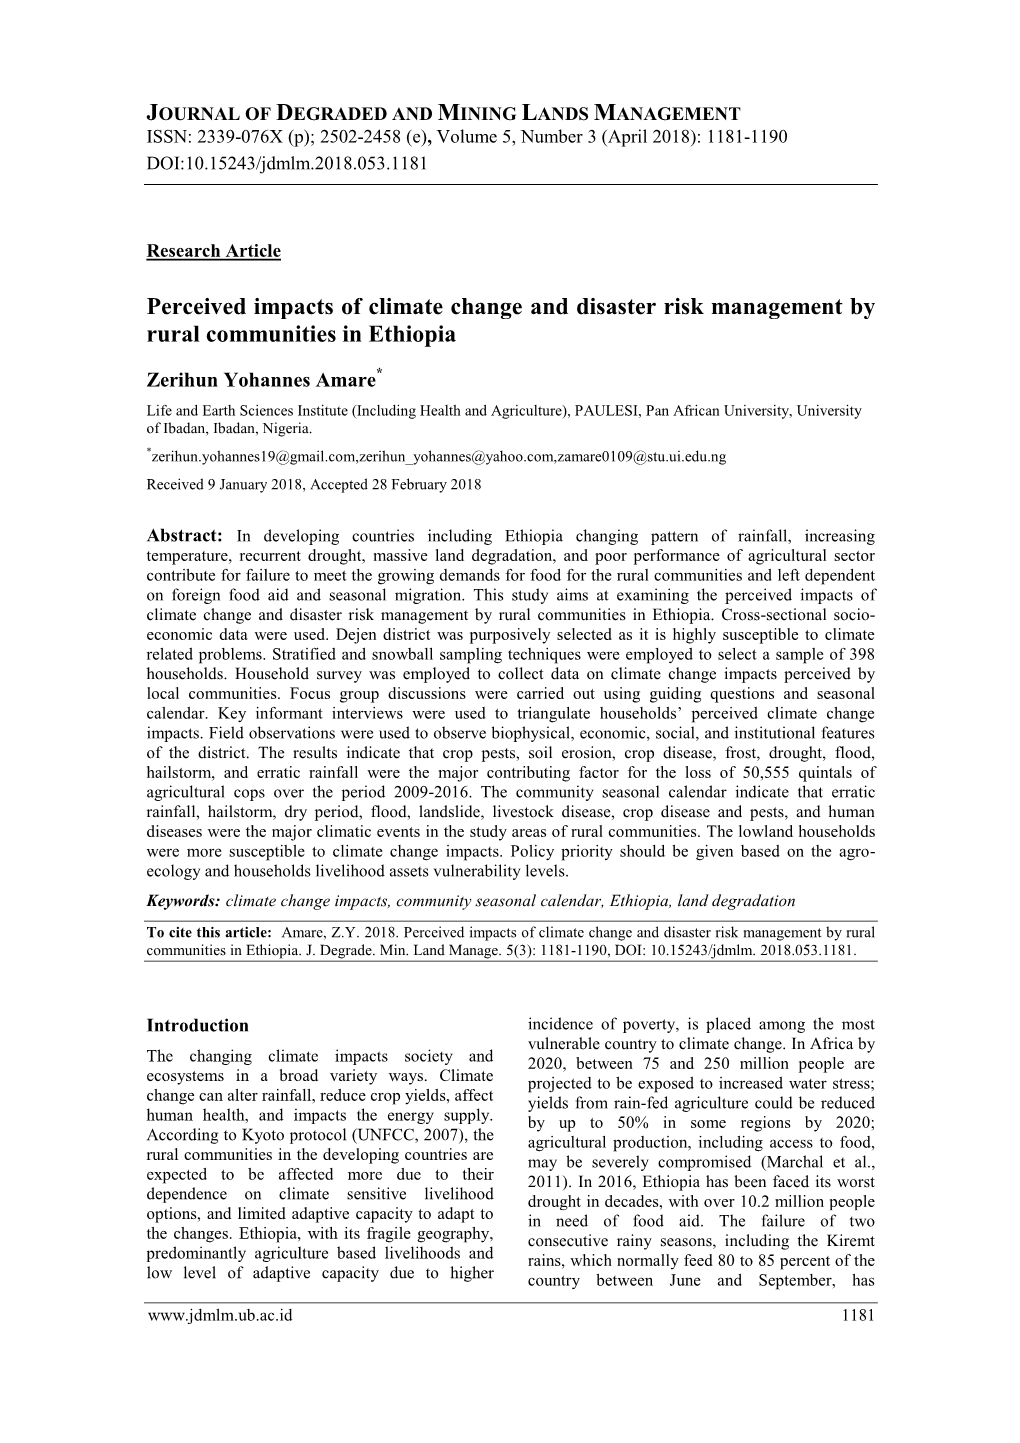 Perceived Impacts of Climate Change and Disaster Risk Management by Rural Communities in Ethiopia